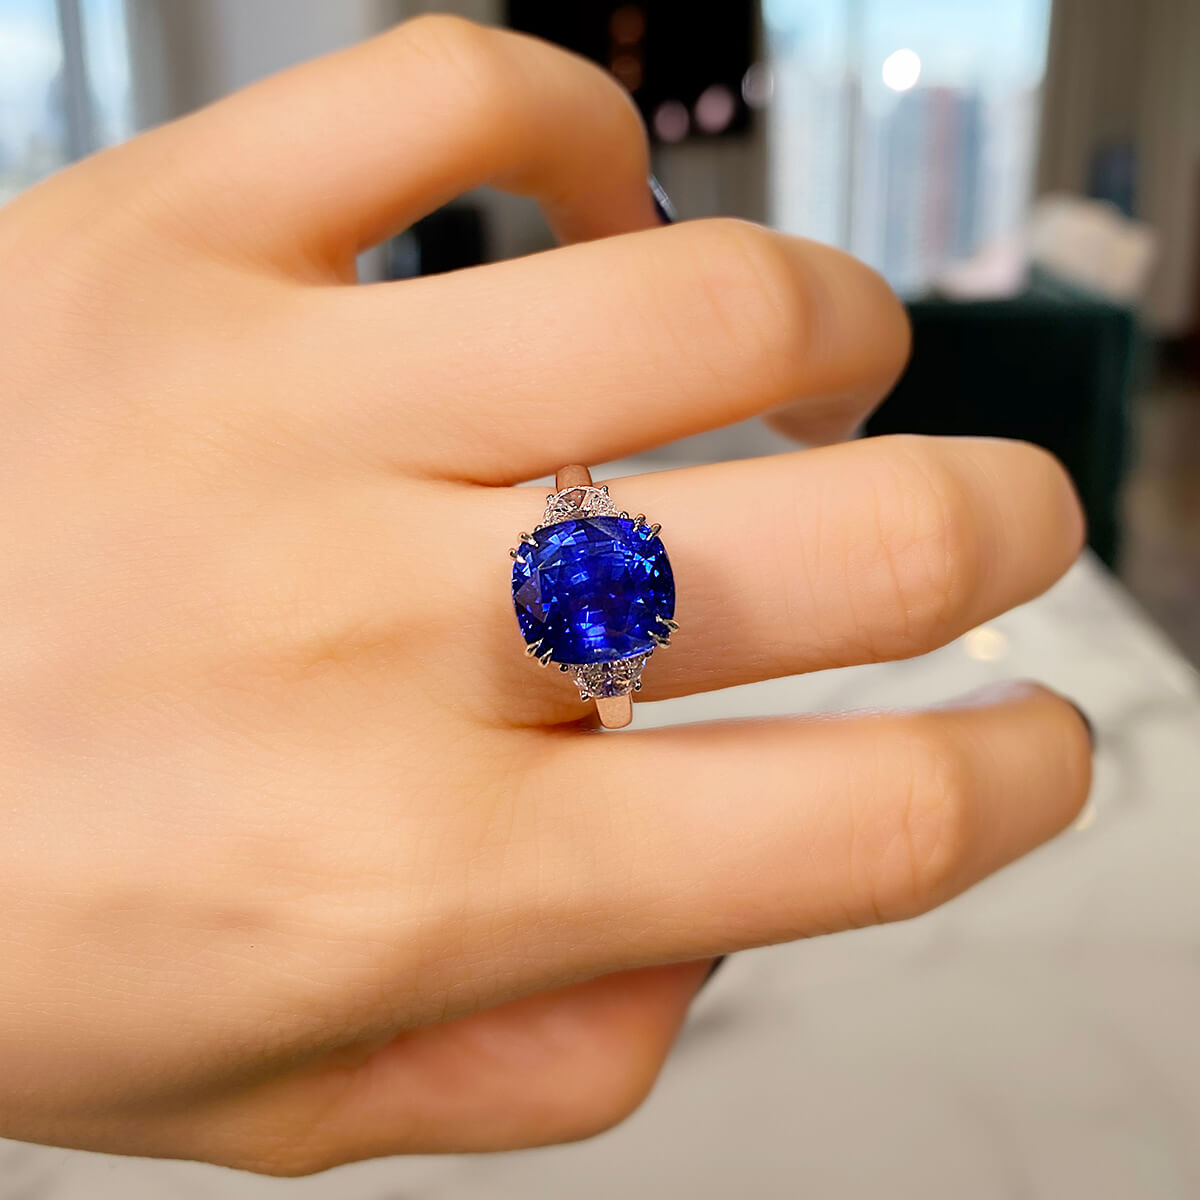 How To Tell If A Sapphire Is Real